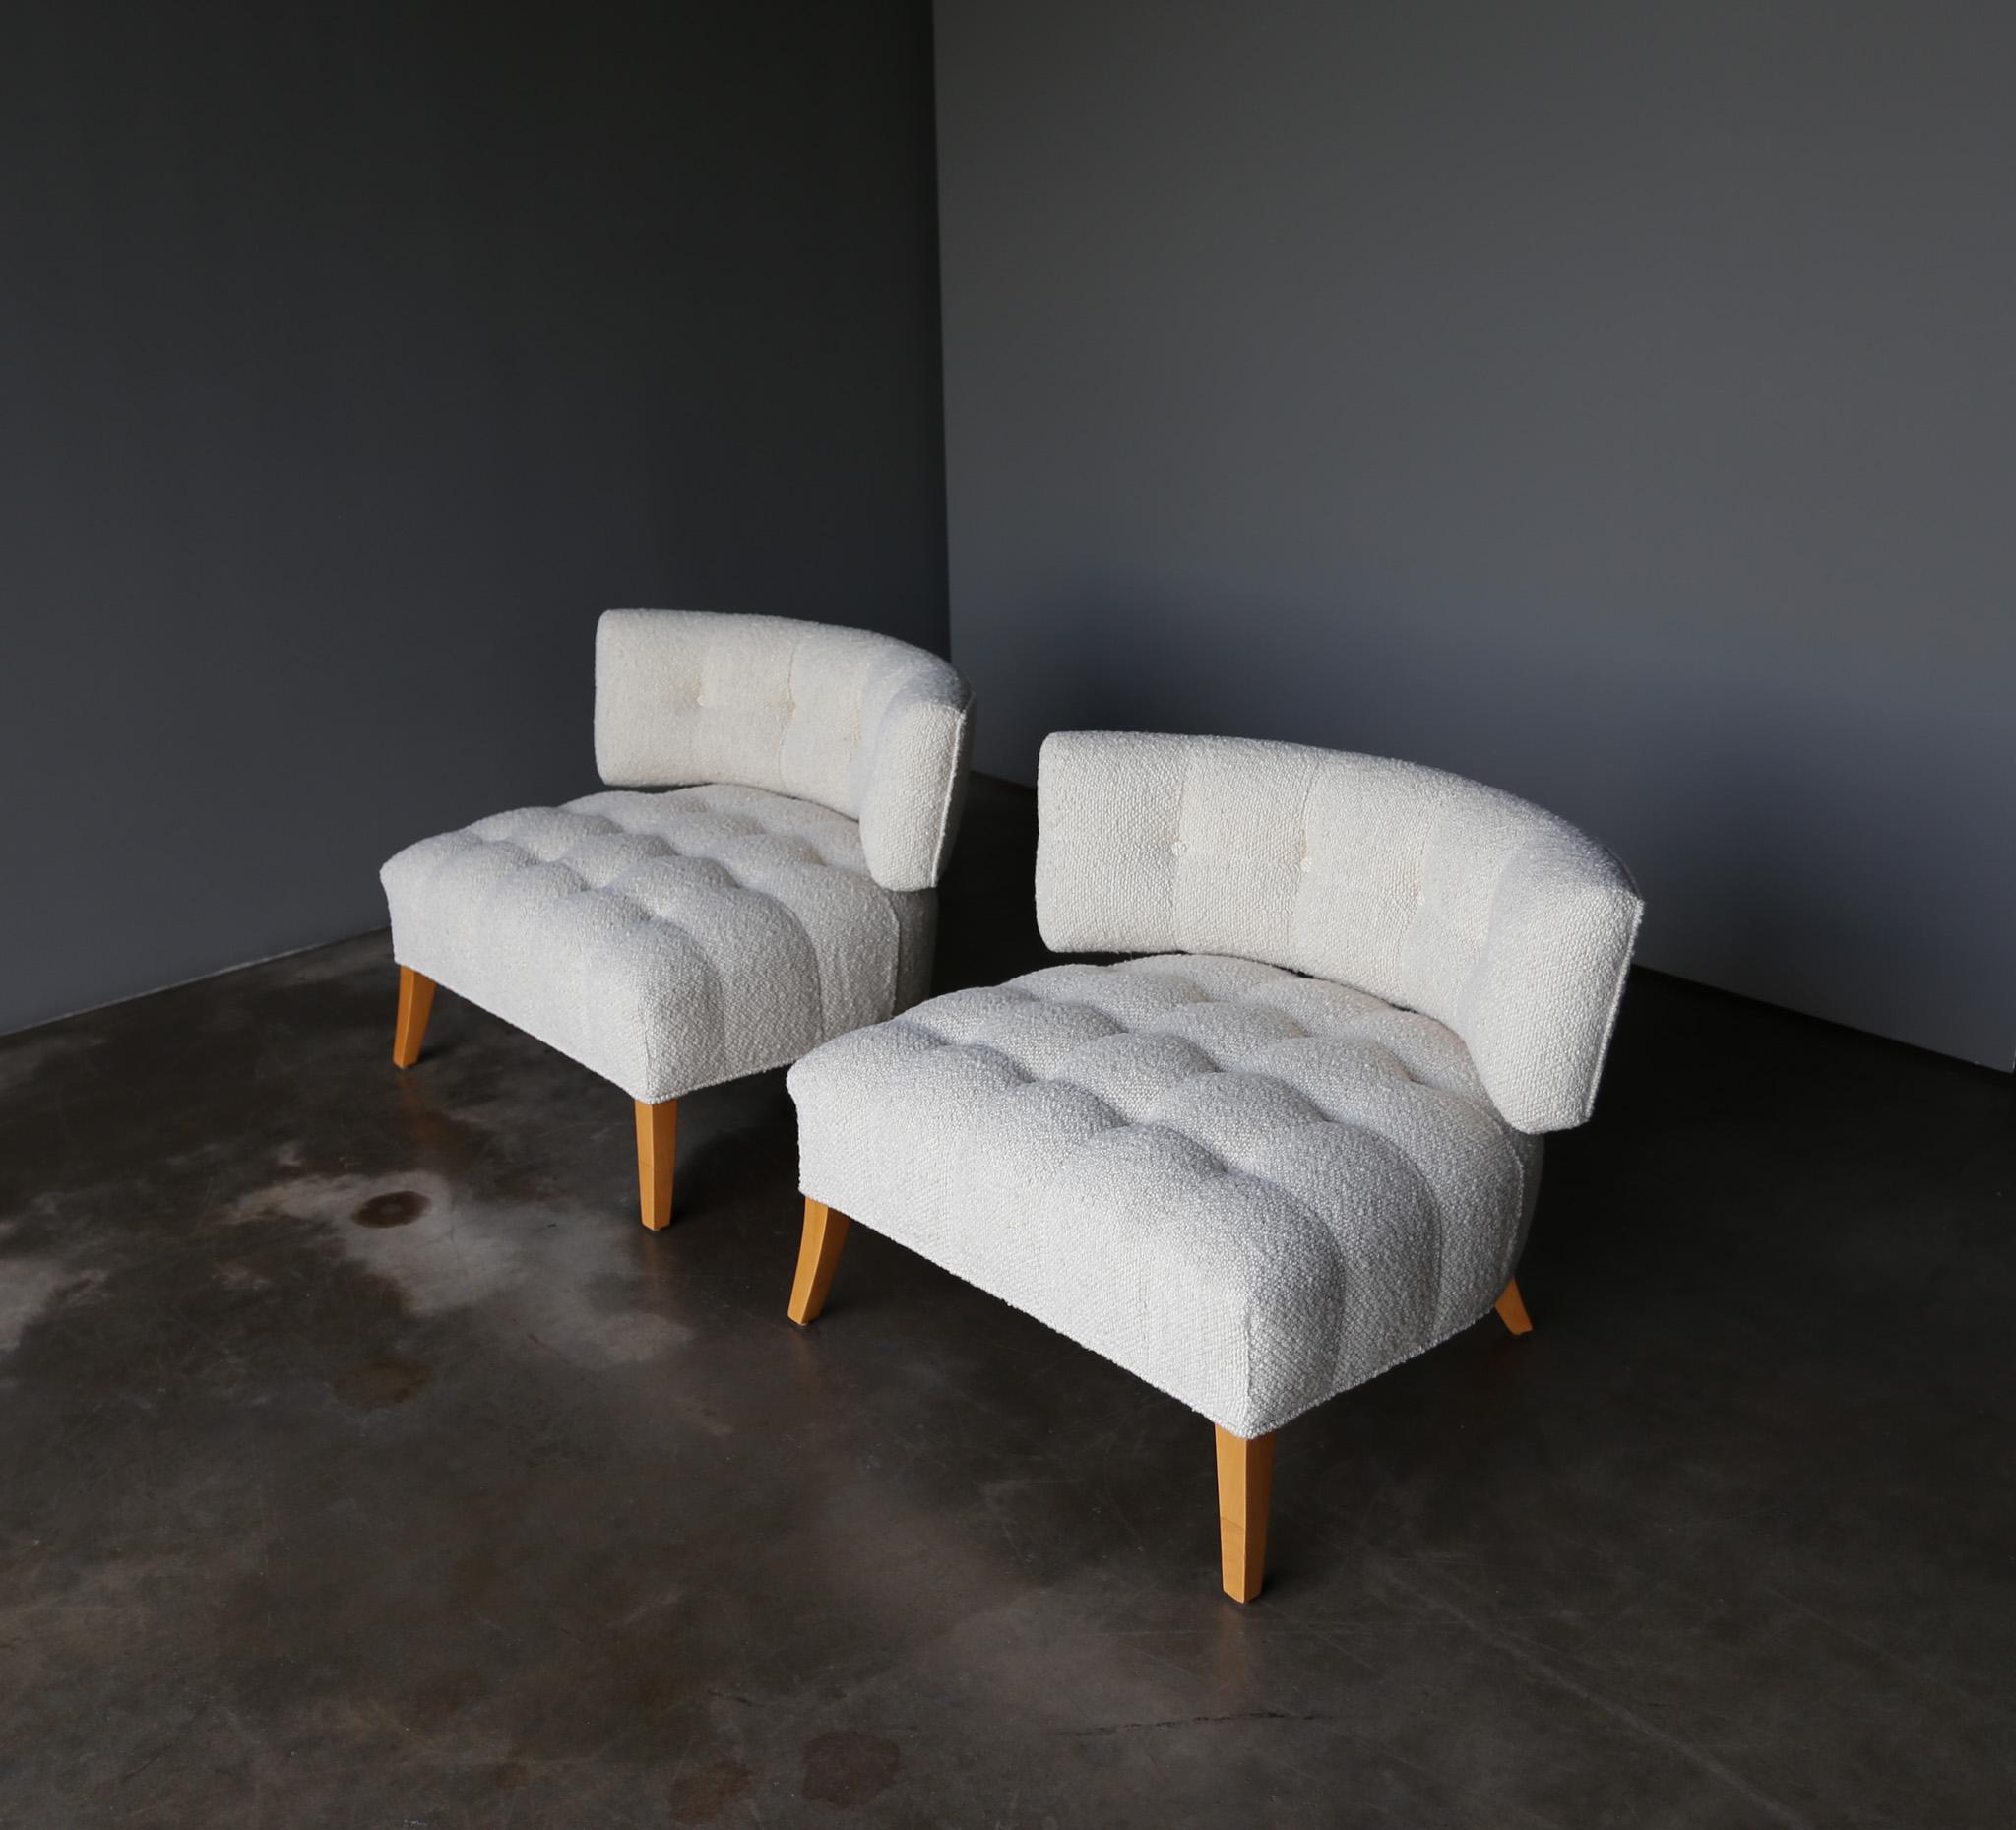 Billy Haines Style Klismos Lounge Chairs, United States, c.1955.  This pair has has been professionally restored.  